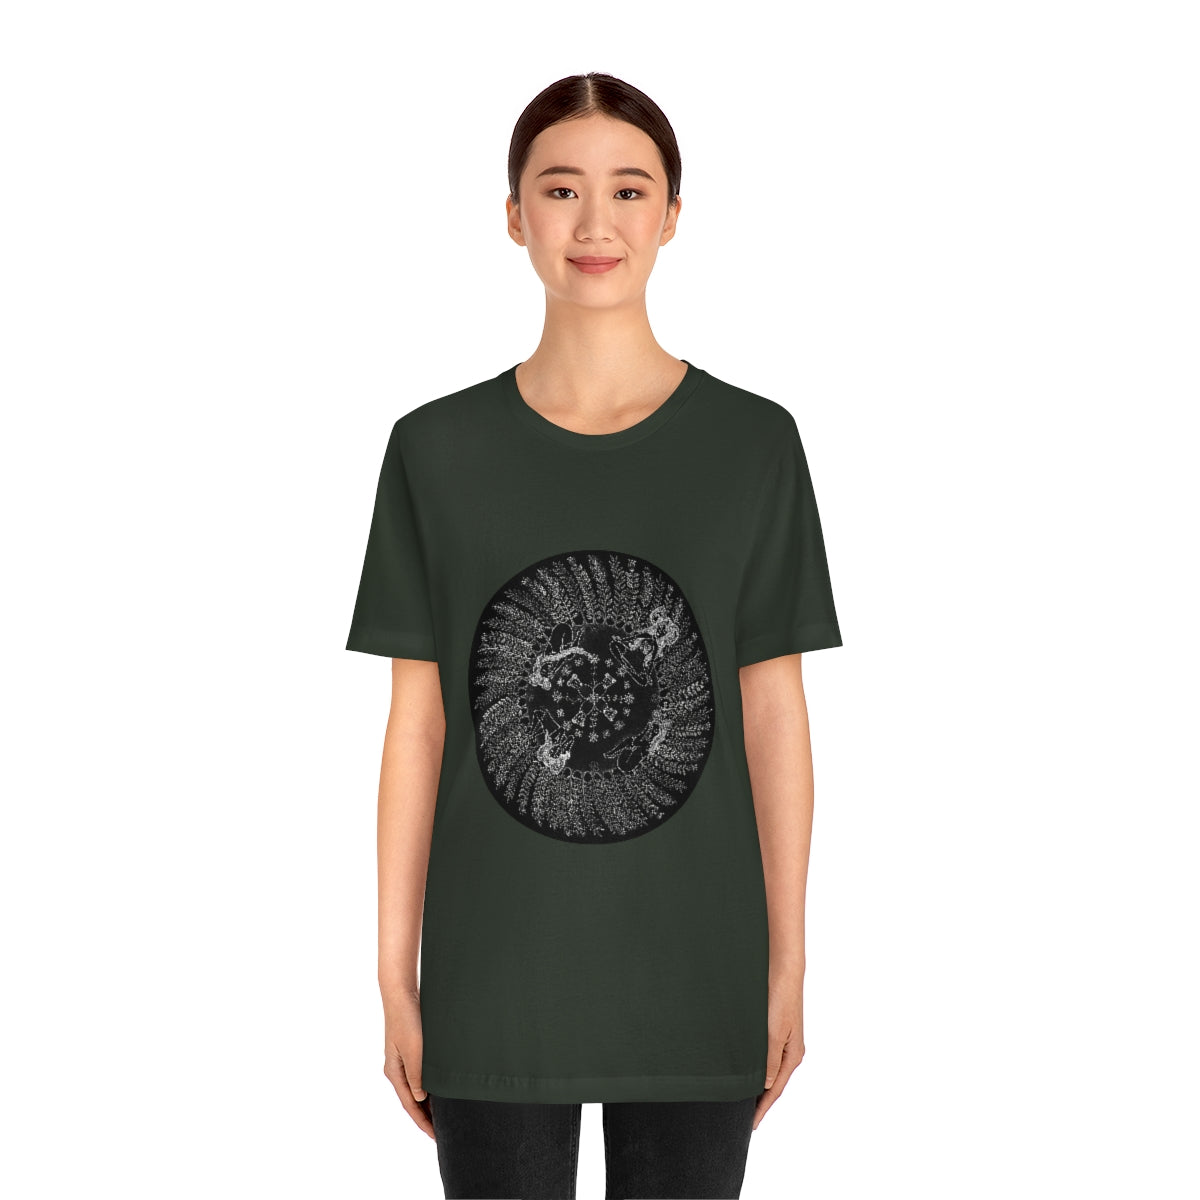 Zodiac Sign T Shirt (Aries) Unisex Regular Fit Limited Edition